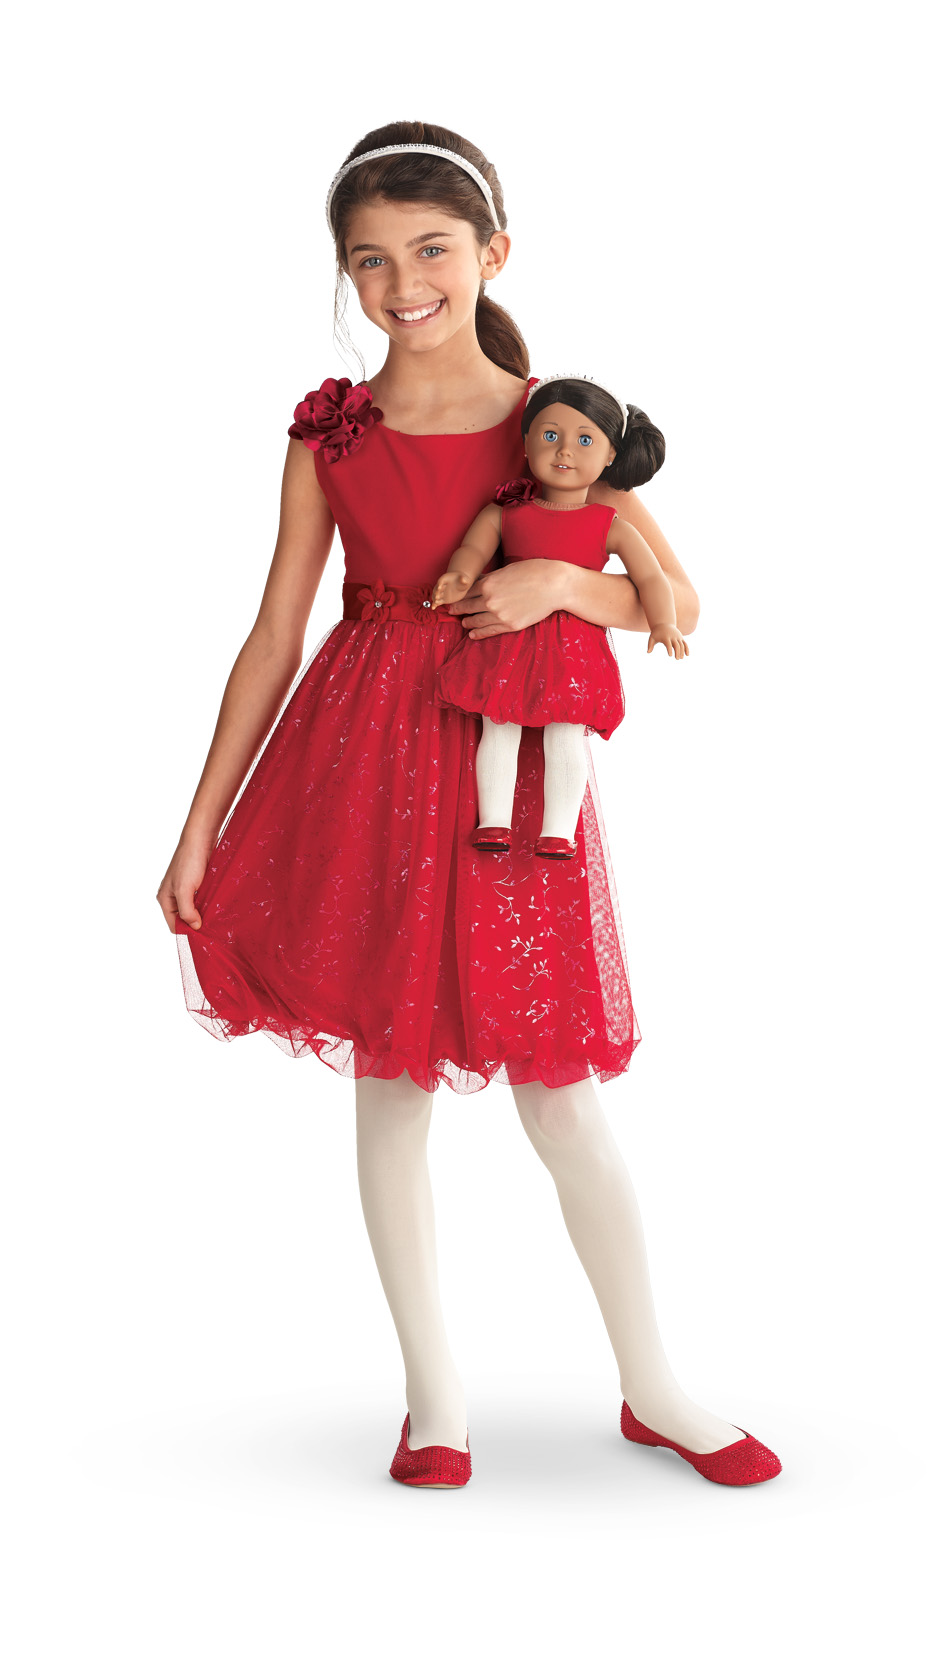 american girl doll matching clothes